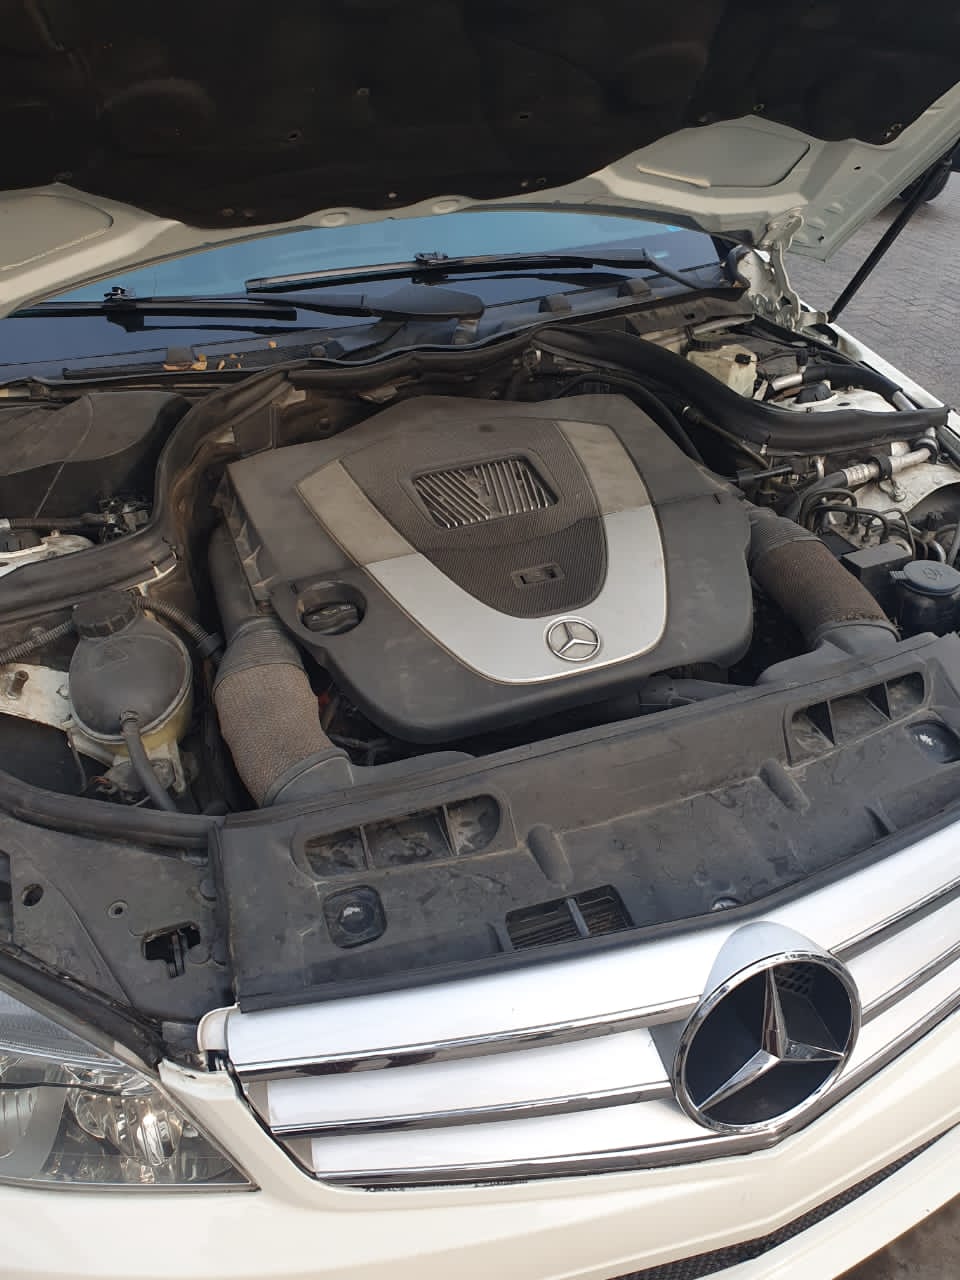 Mercedes Benz C300 4matic 2009 is available at Efritin